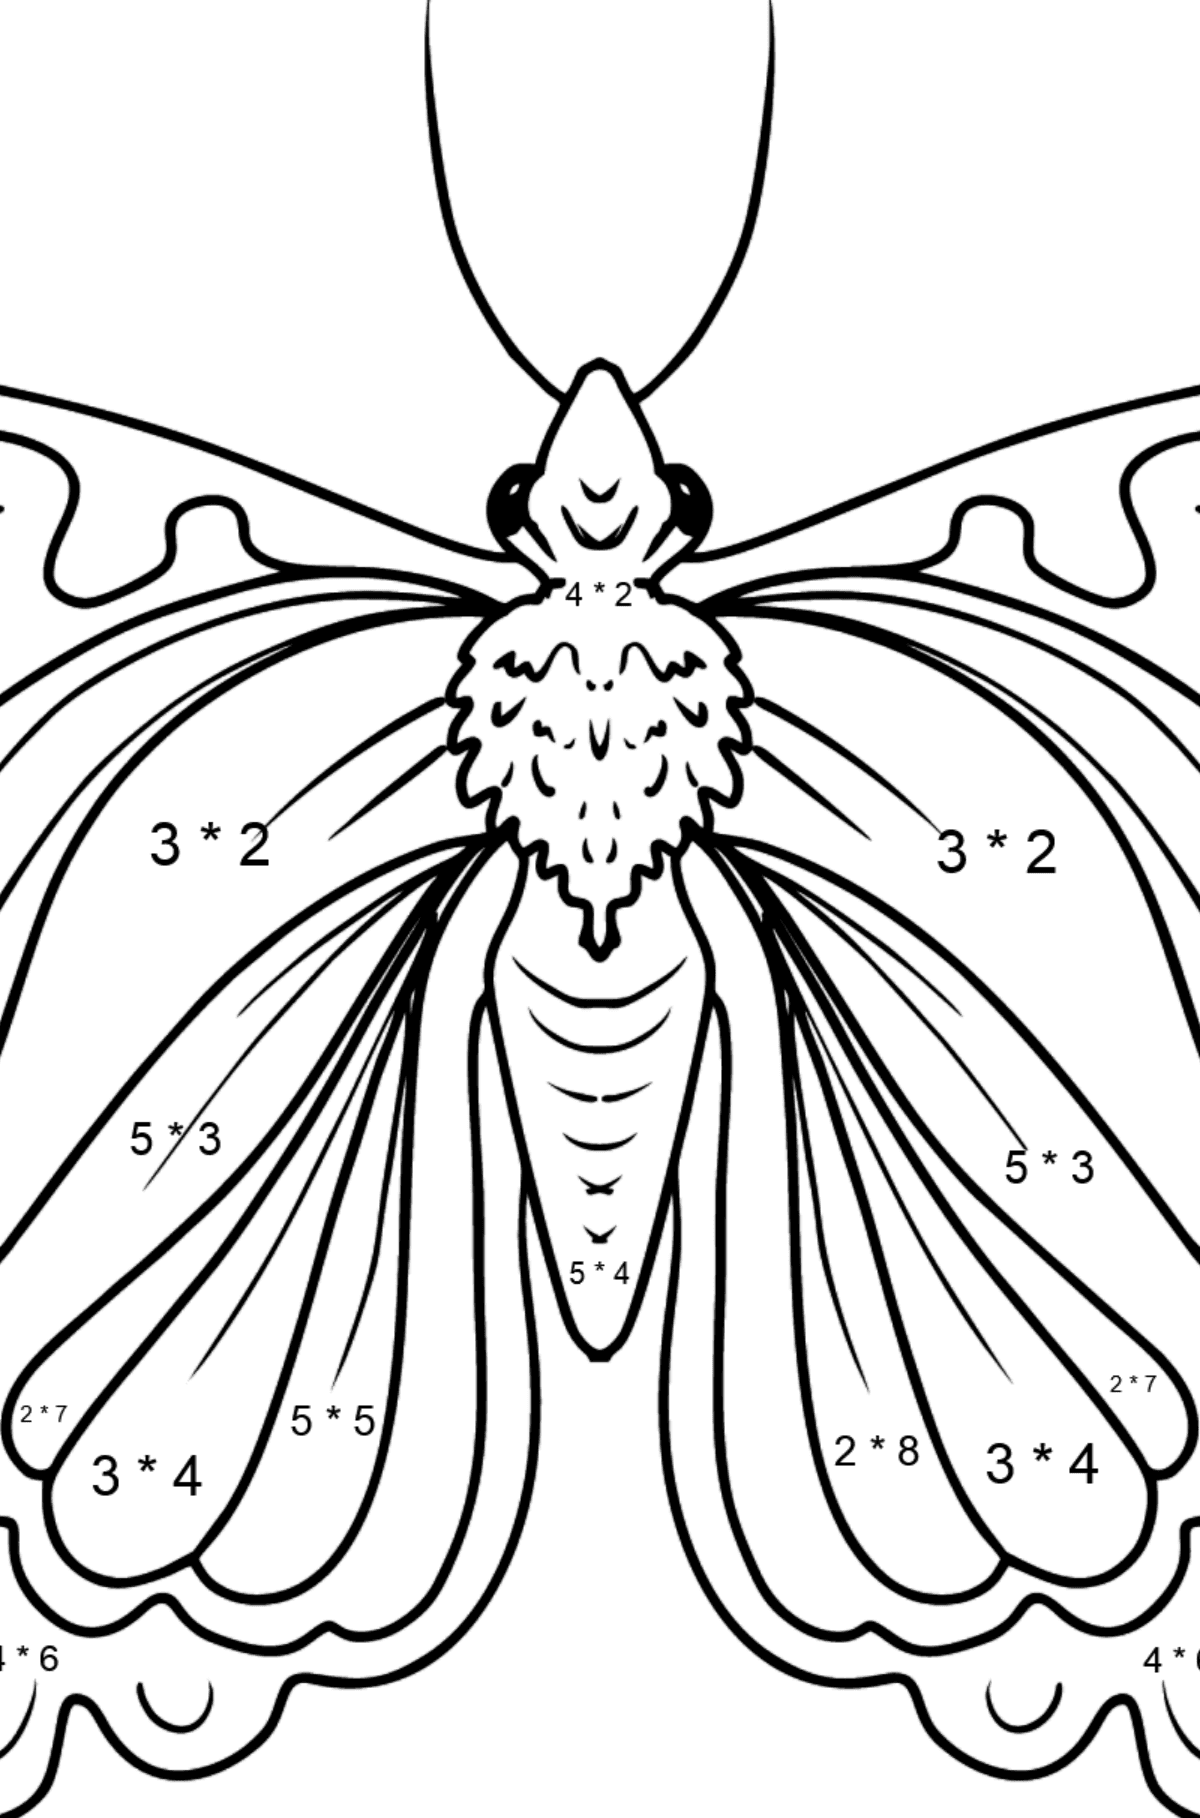 Cute Butterfly coloring page - Math Coloring - Multiplication for Kids